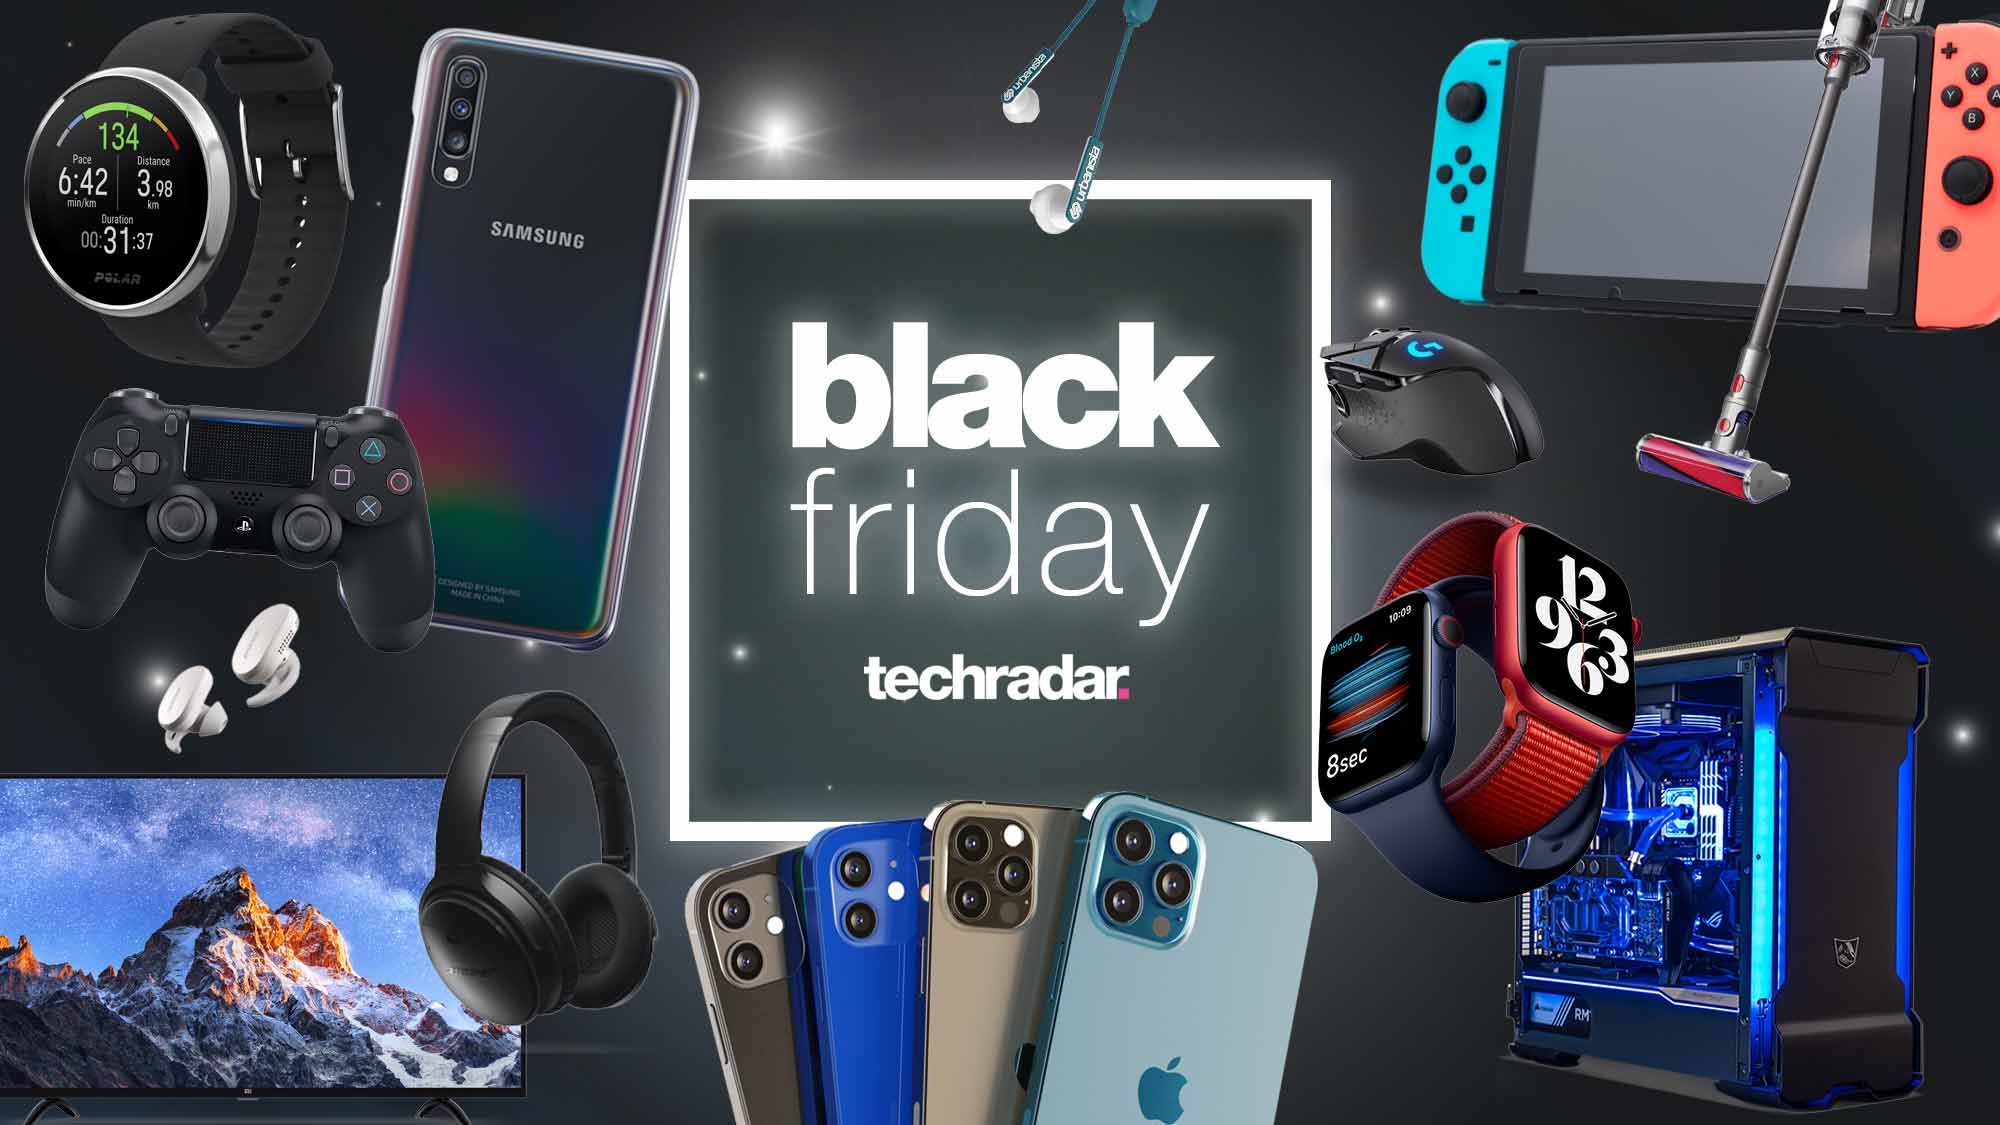 some of the best deals will come before black friday reviews by wirecutter on should i buy amazon stock before black friday